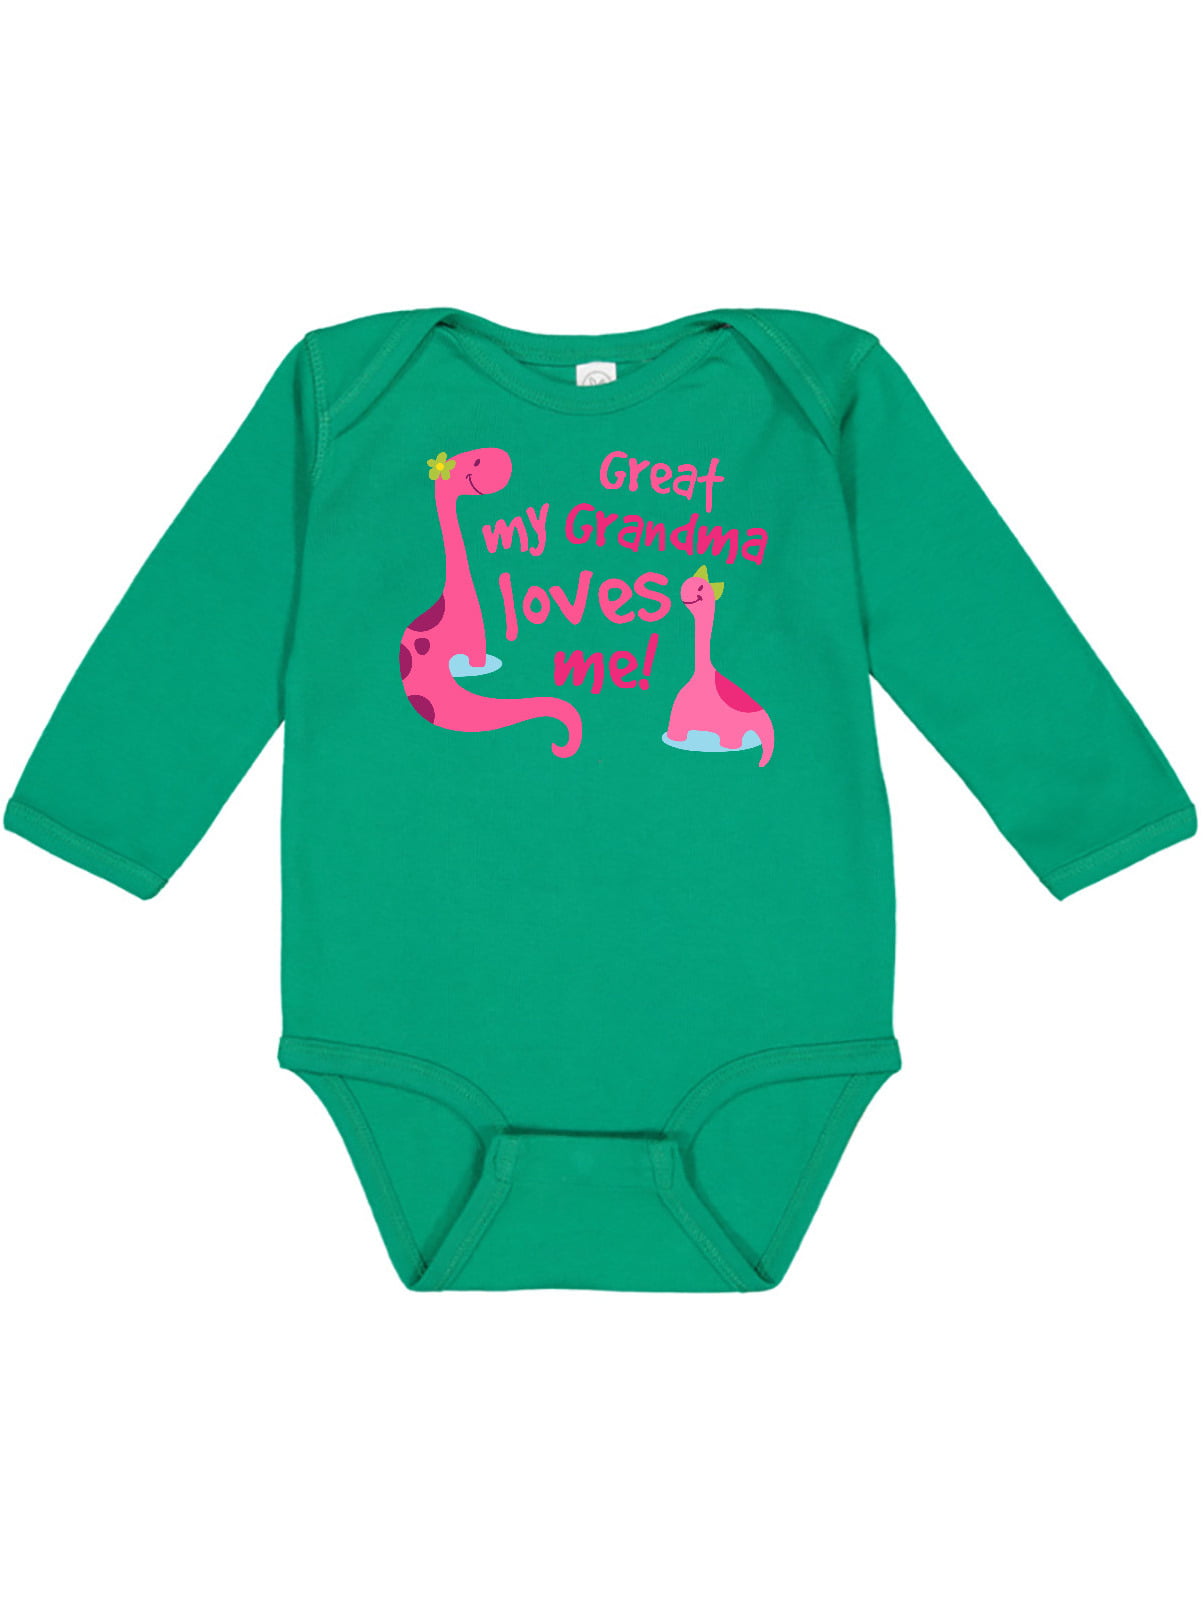 XMAS Baby Girl Toddler Kelly Green wif Red Ruffled Lacing Jumpsuit Romper NB-12M